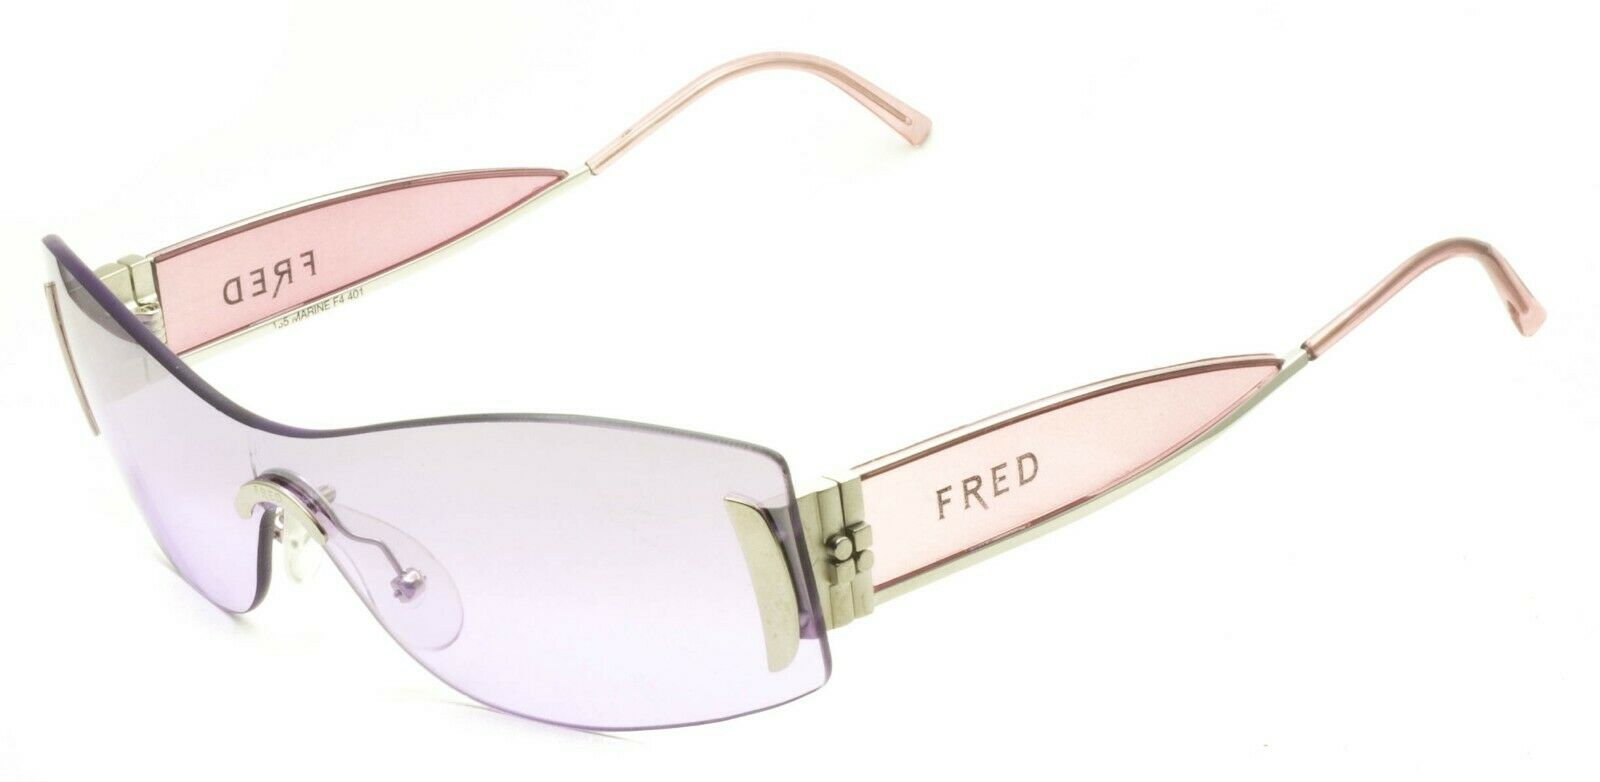 Fred Force 10 collection, inspired by the nautical world and its passion for